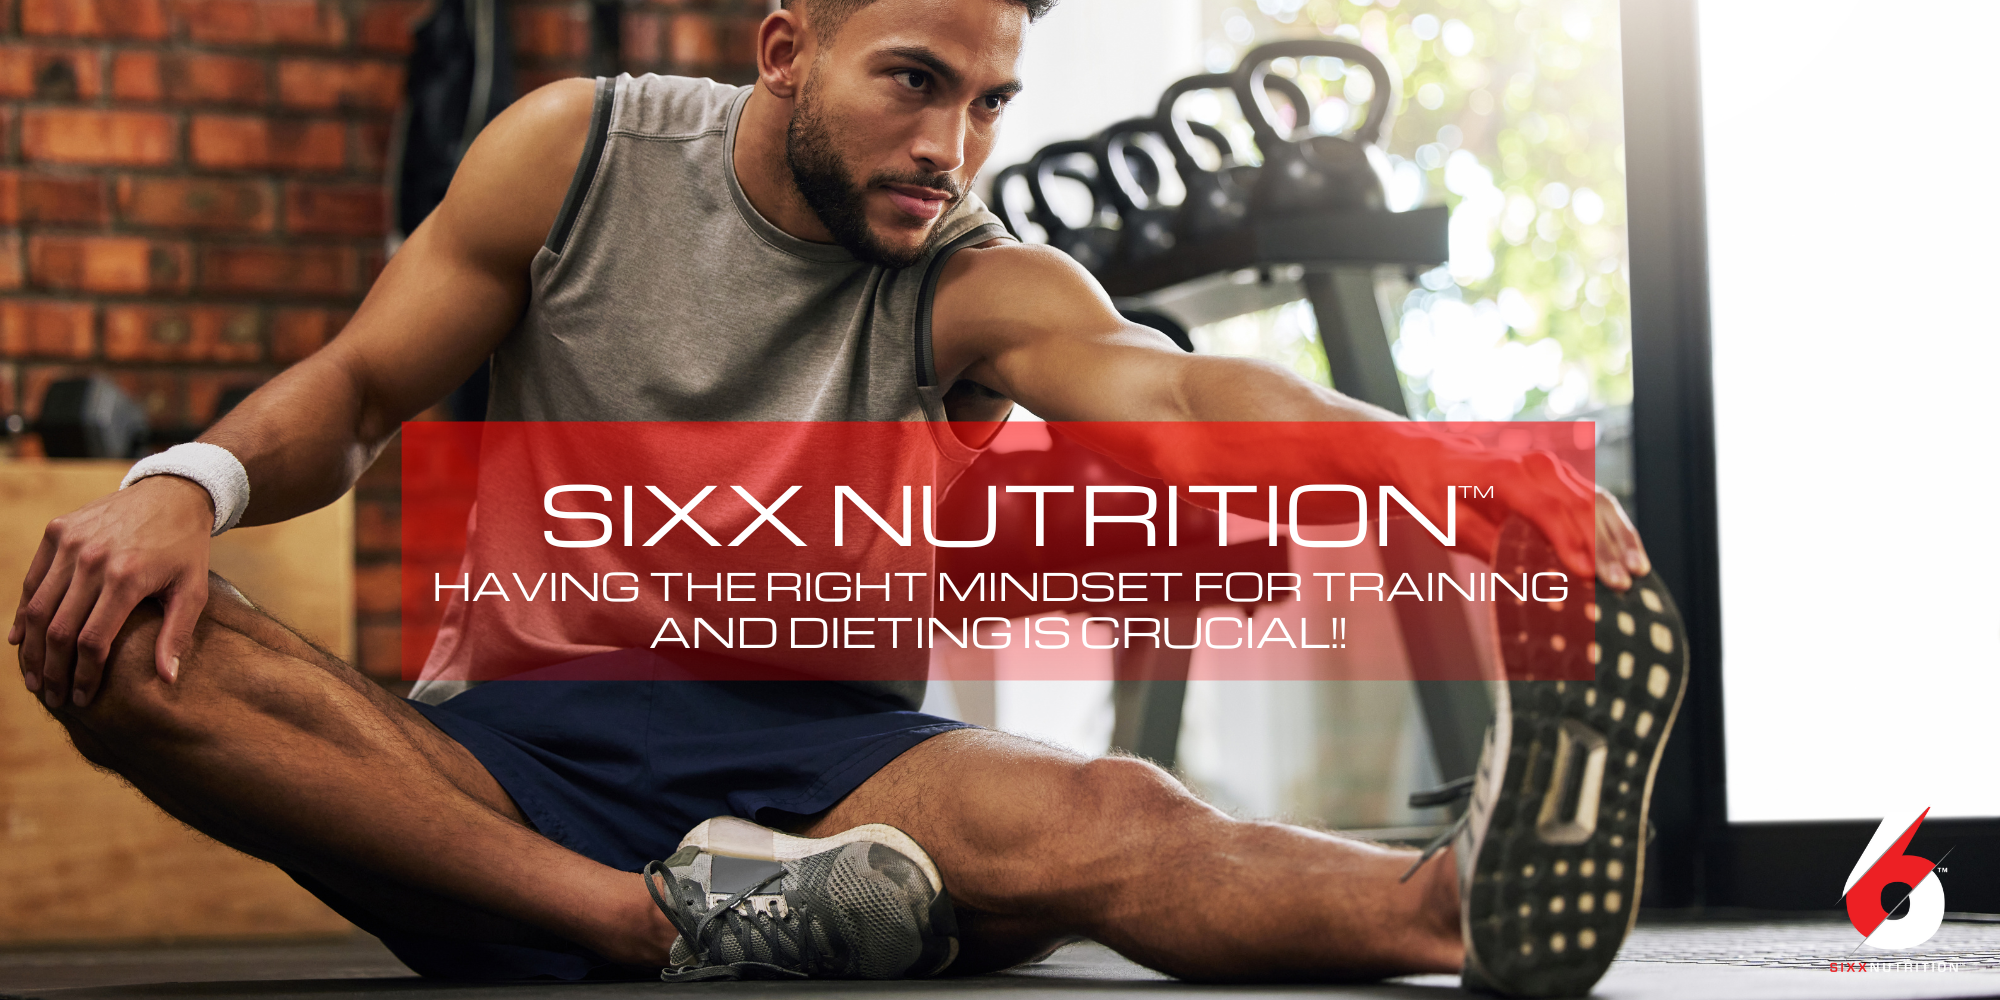 Having the right mindset for training and dieting is crucial!!